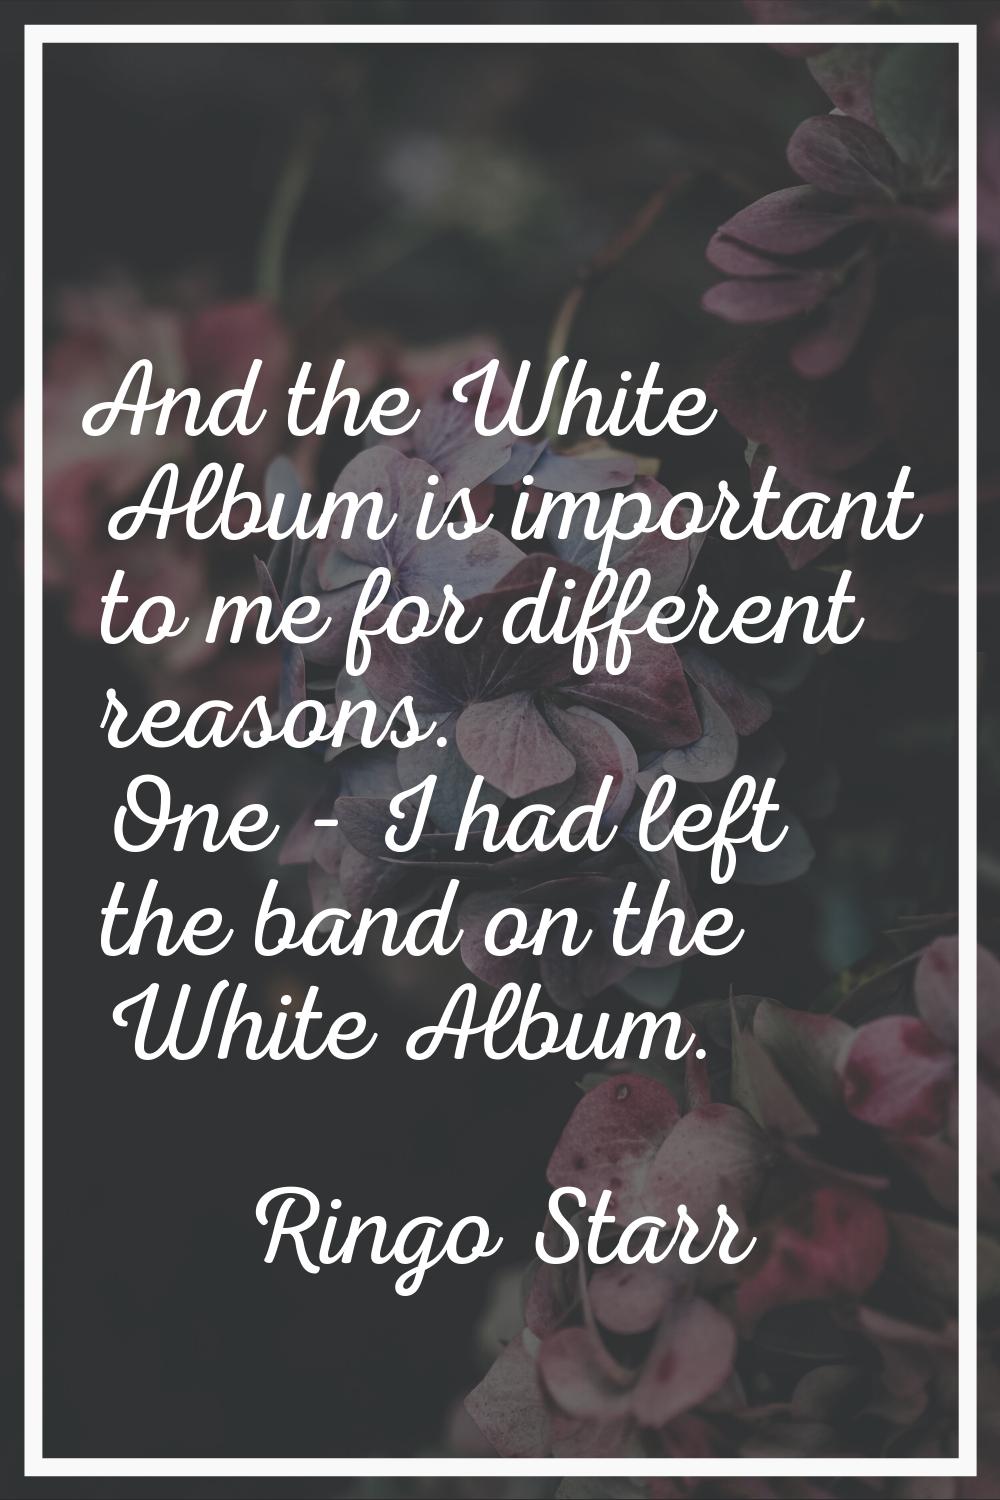 And the White Album is important to me for different reasons. One - I had left the band on the Whit